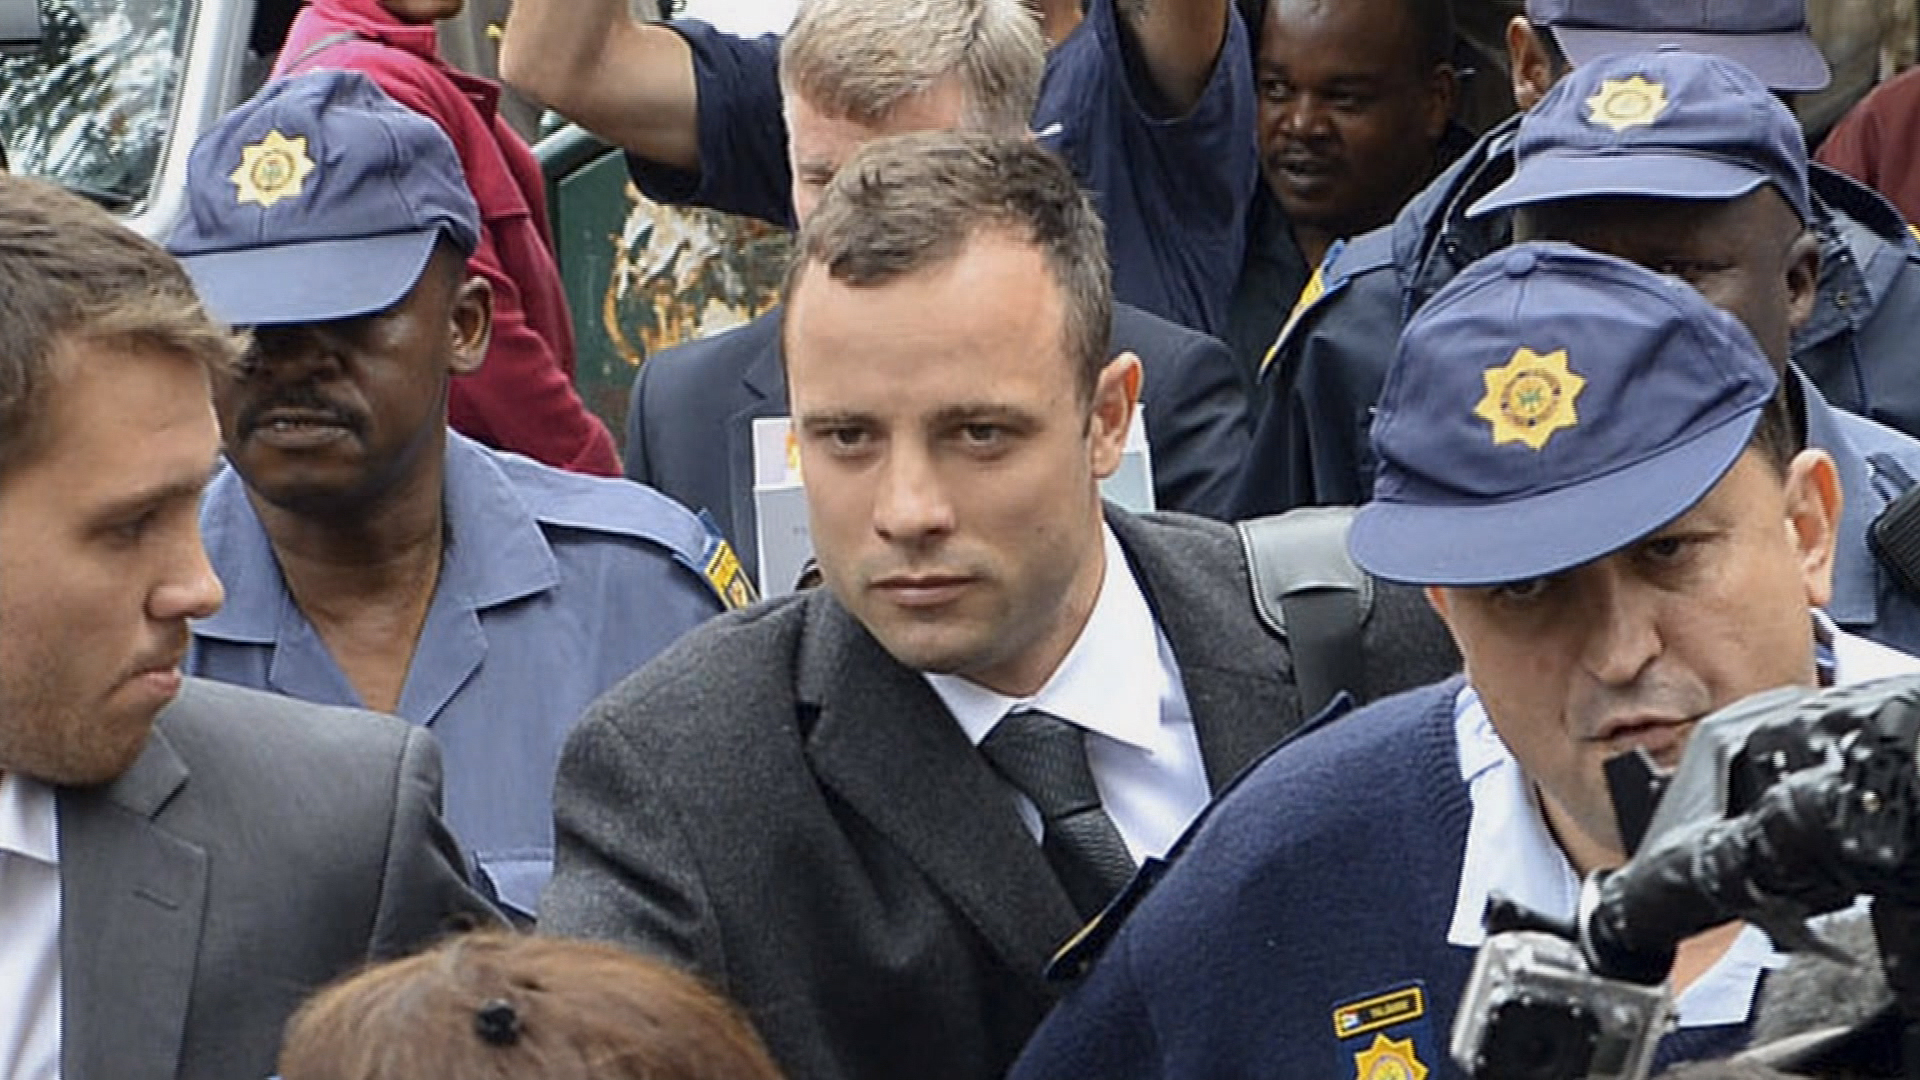 Oscar Pistorius set to be released from prison after 1 year in prison - TODAY.com